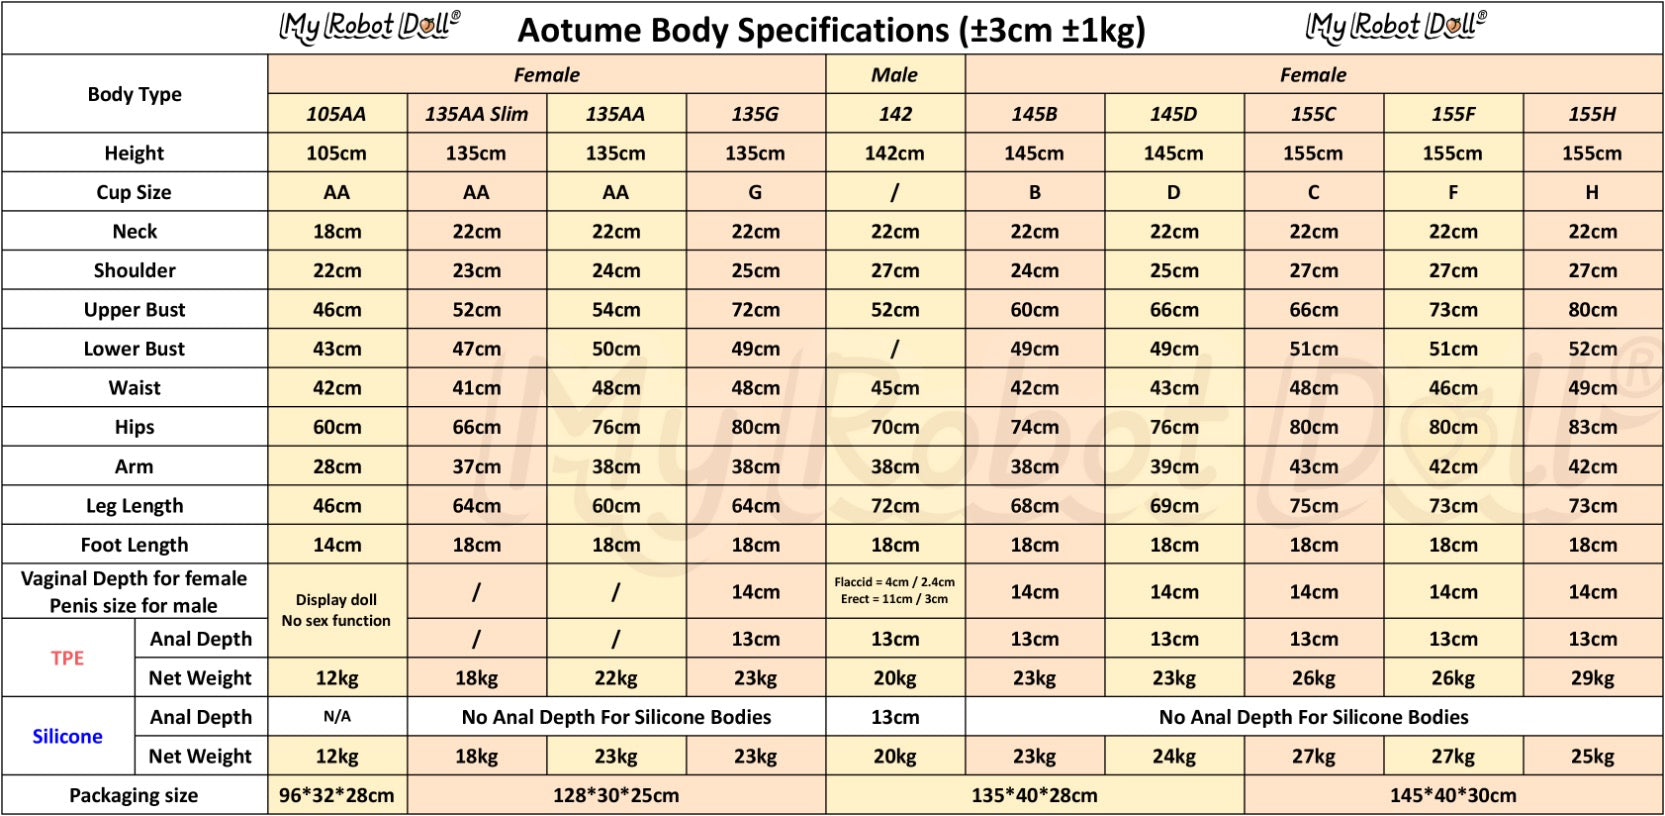 Aotume Dolls Body Specifications